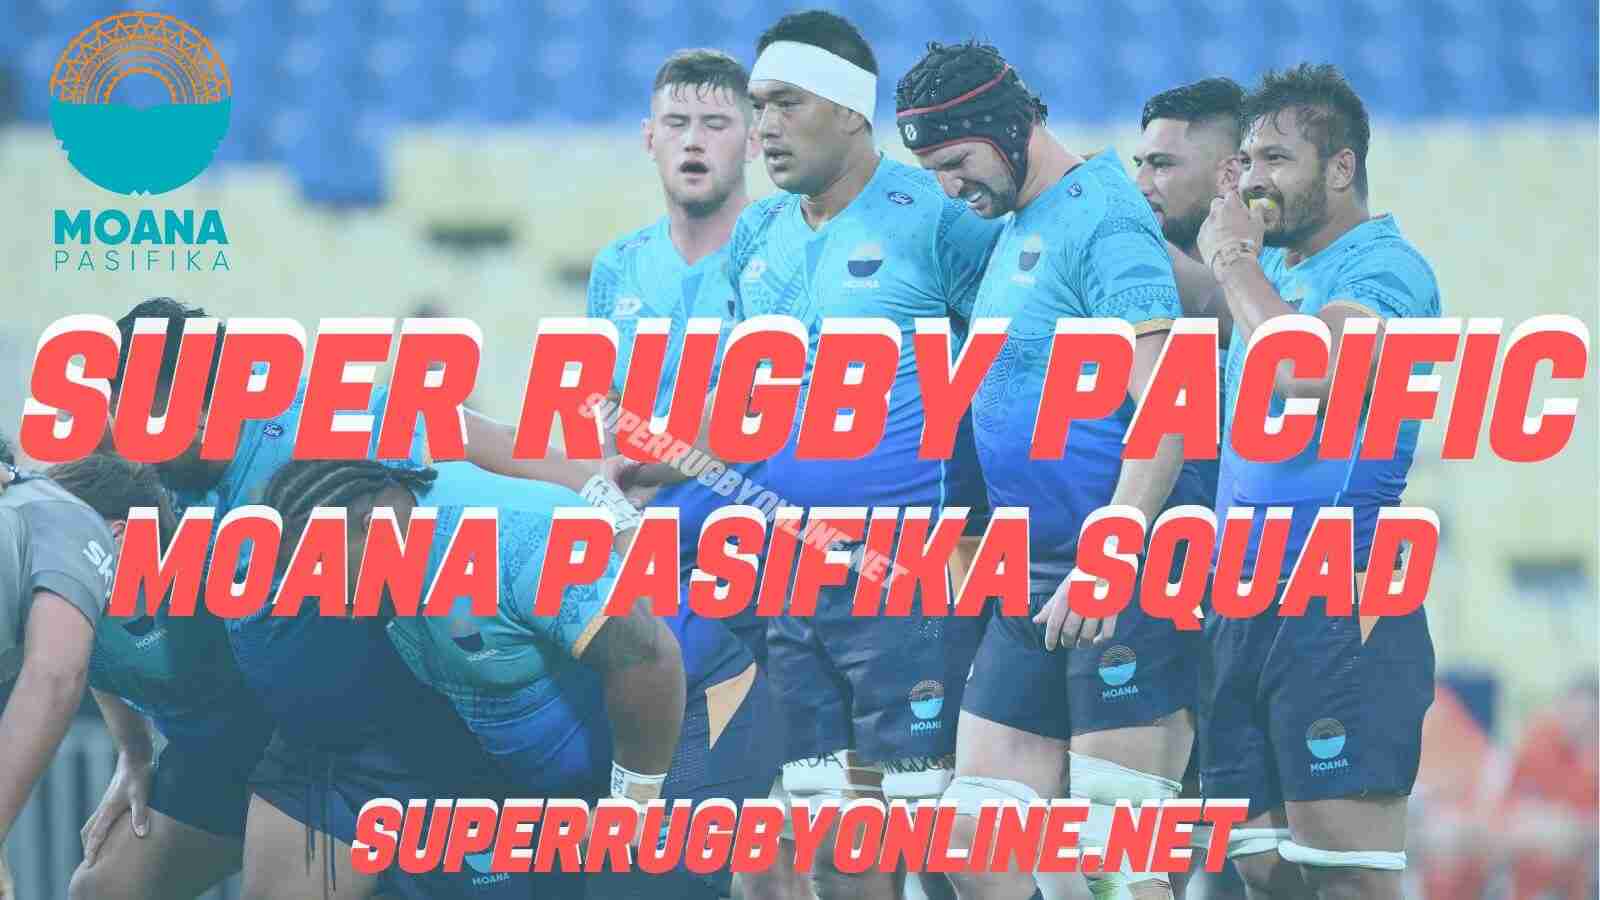 moana-pasifika-squad-super-rugby-pacific